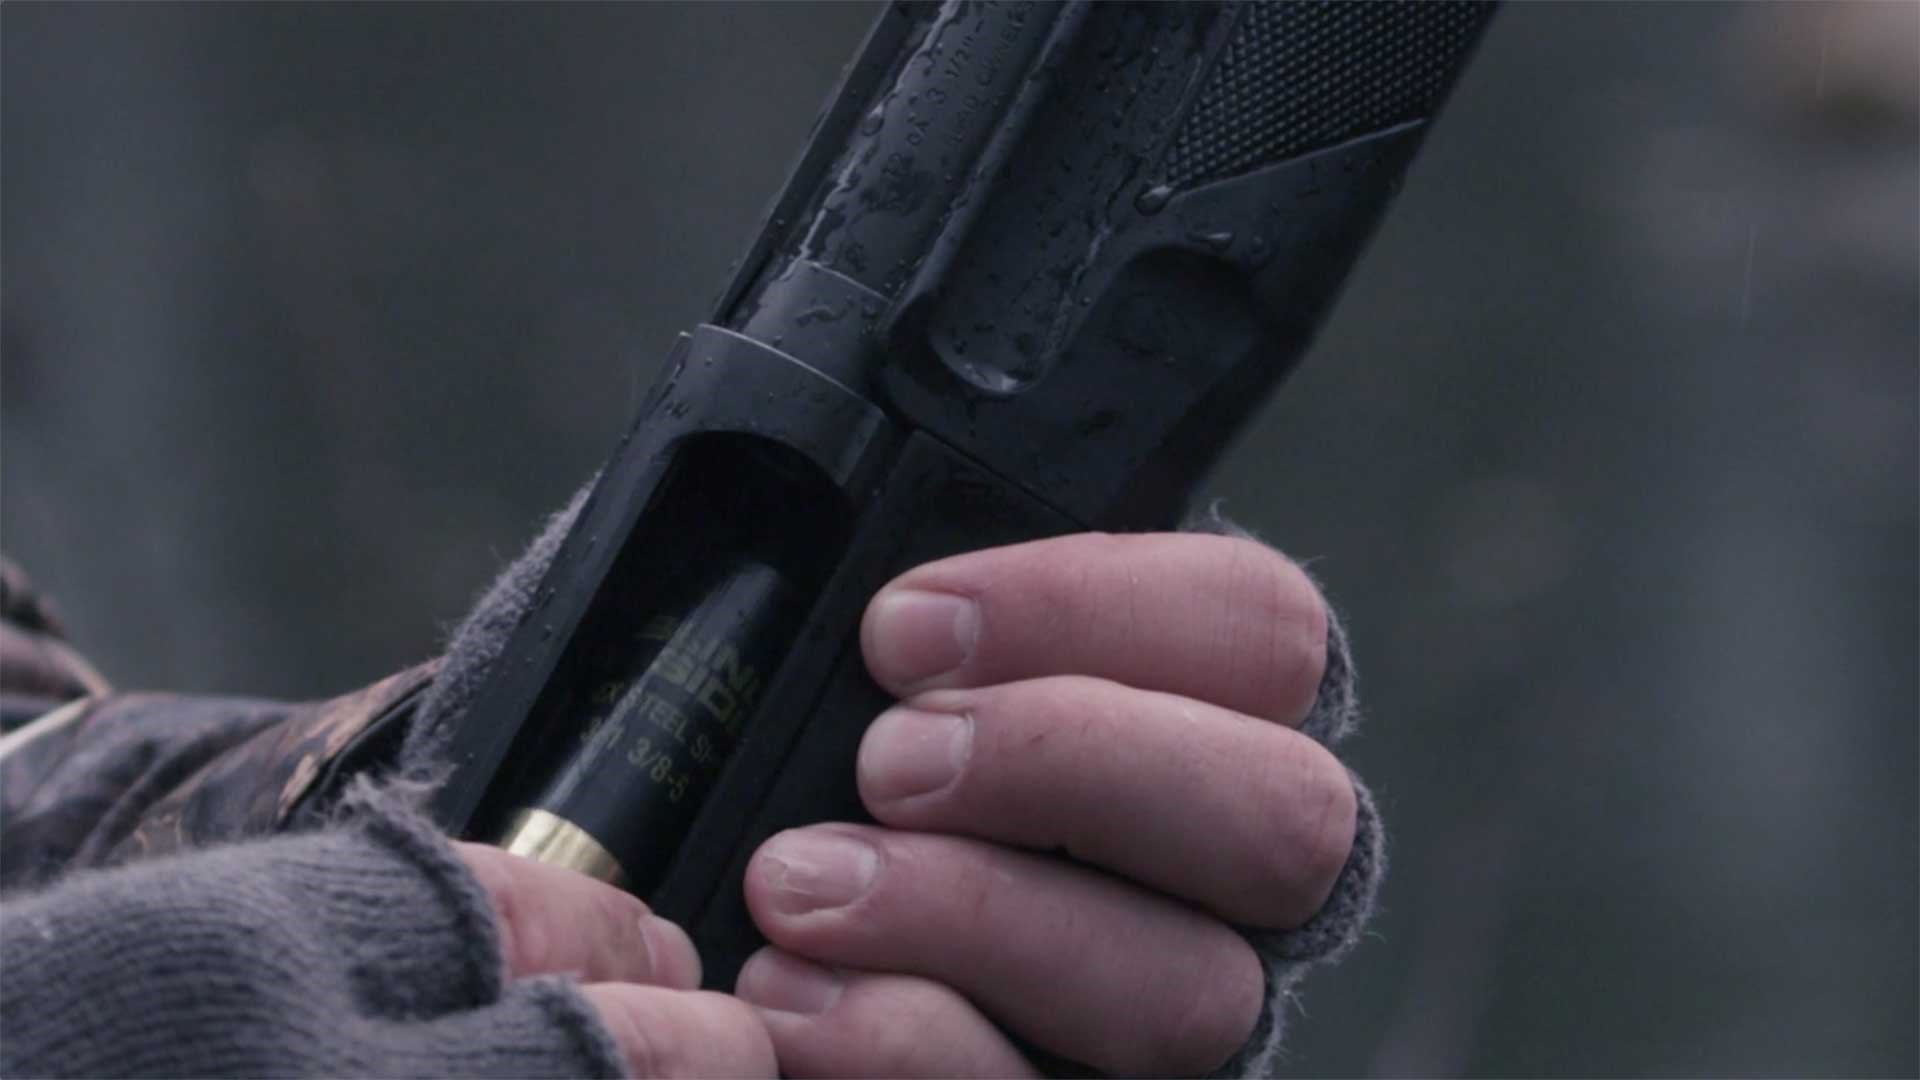 A man with gloved hands inserts a shotshell into a black hunting shotgun.